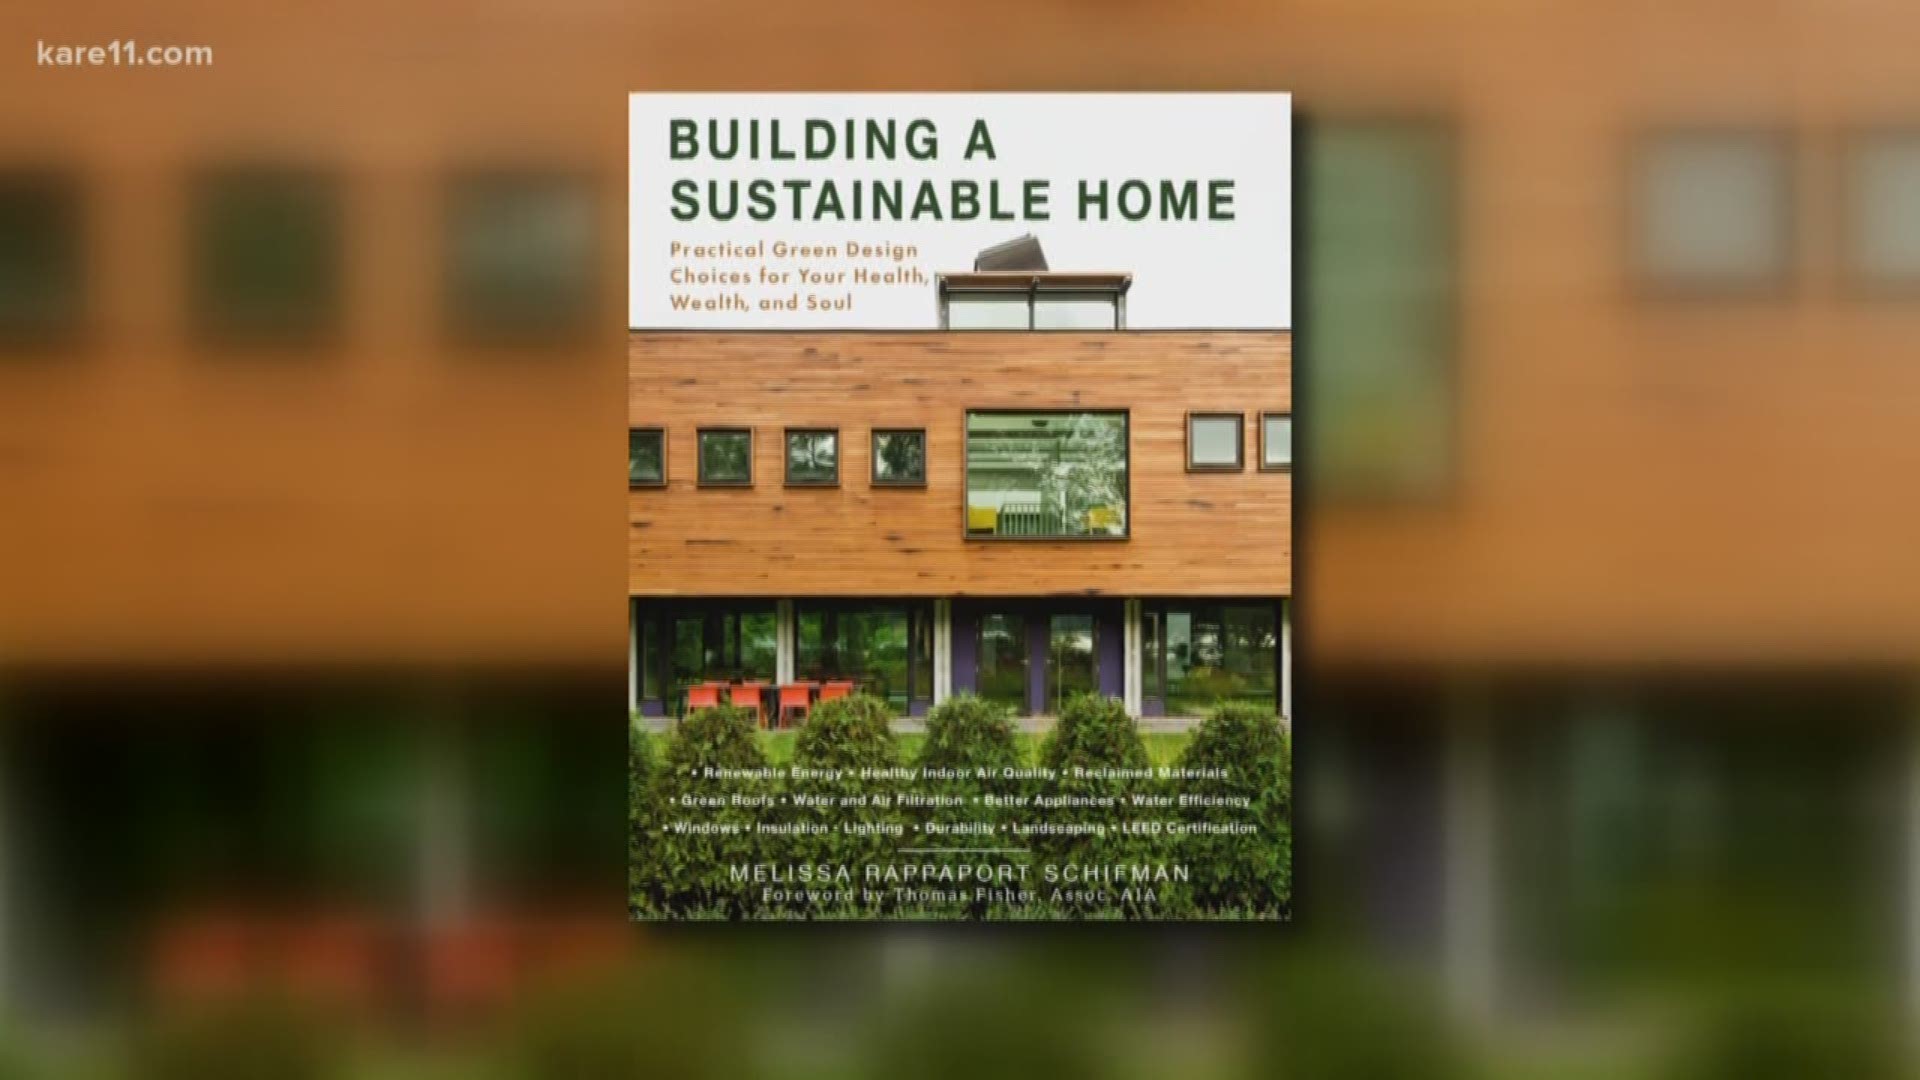 In honor of Earth Day, KARE11 gets some tips to make your home more sustainable from Minnesota author Melissa Rappaport Schifman.